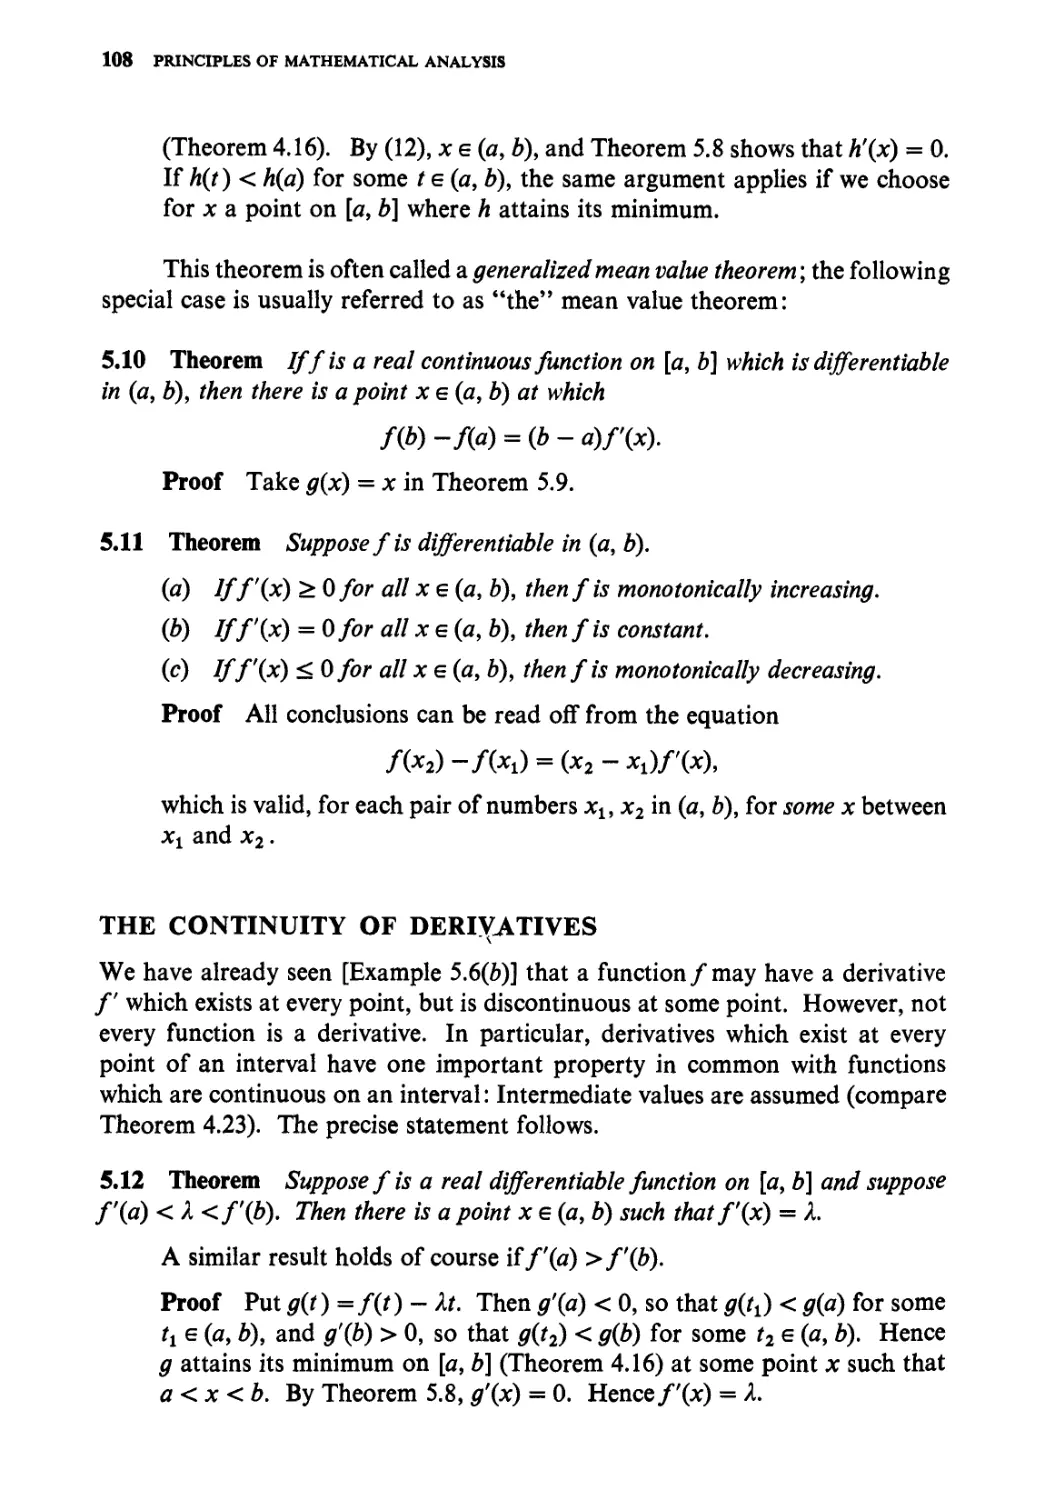 The continuity of derivatives